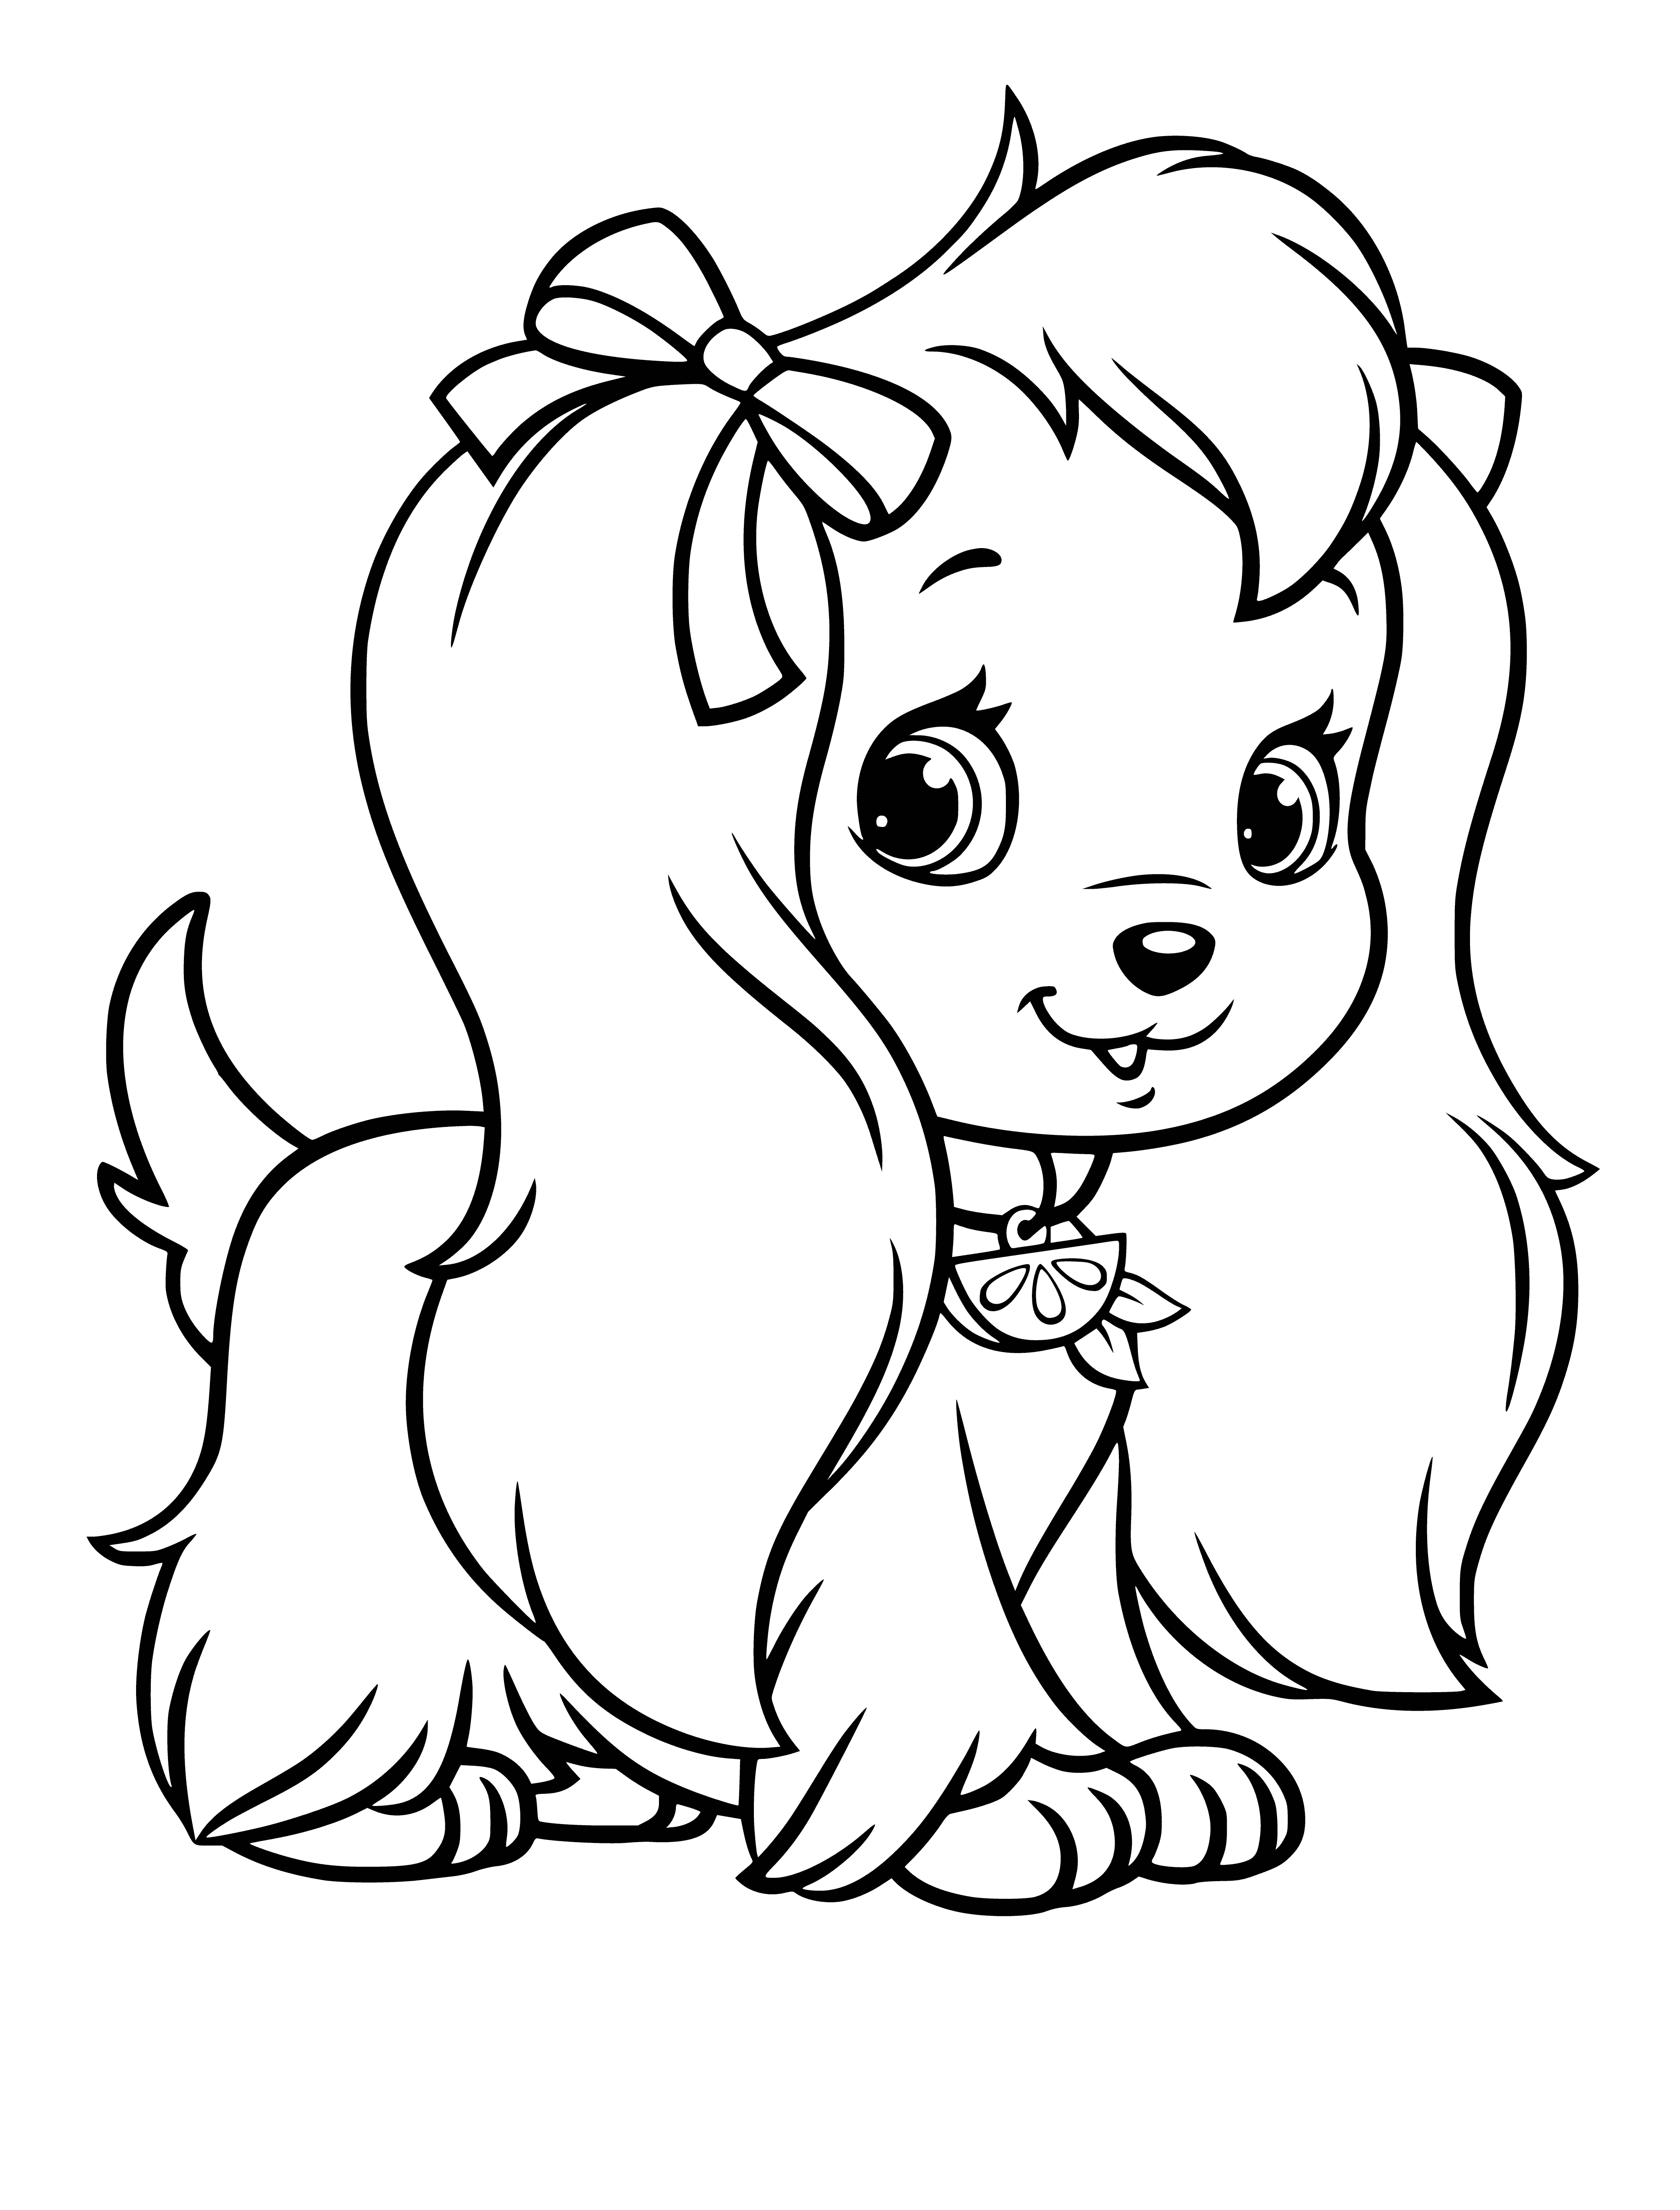 coloring page: A pet henna spaniel sits looking at a smiling lemon on a plate with a yellow border.